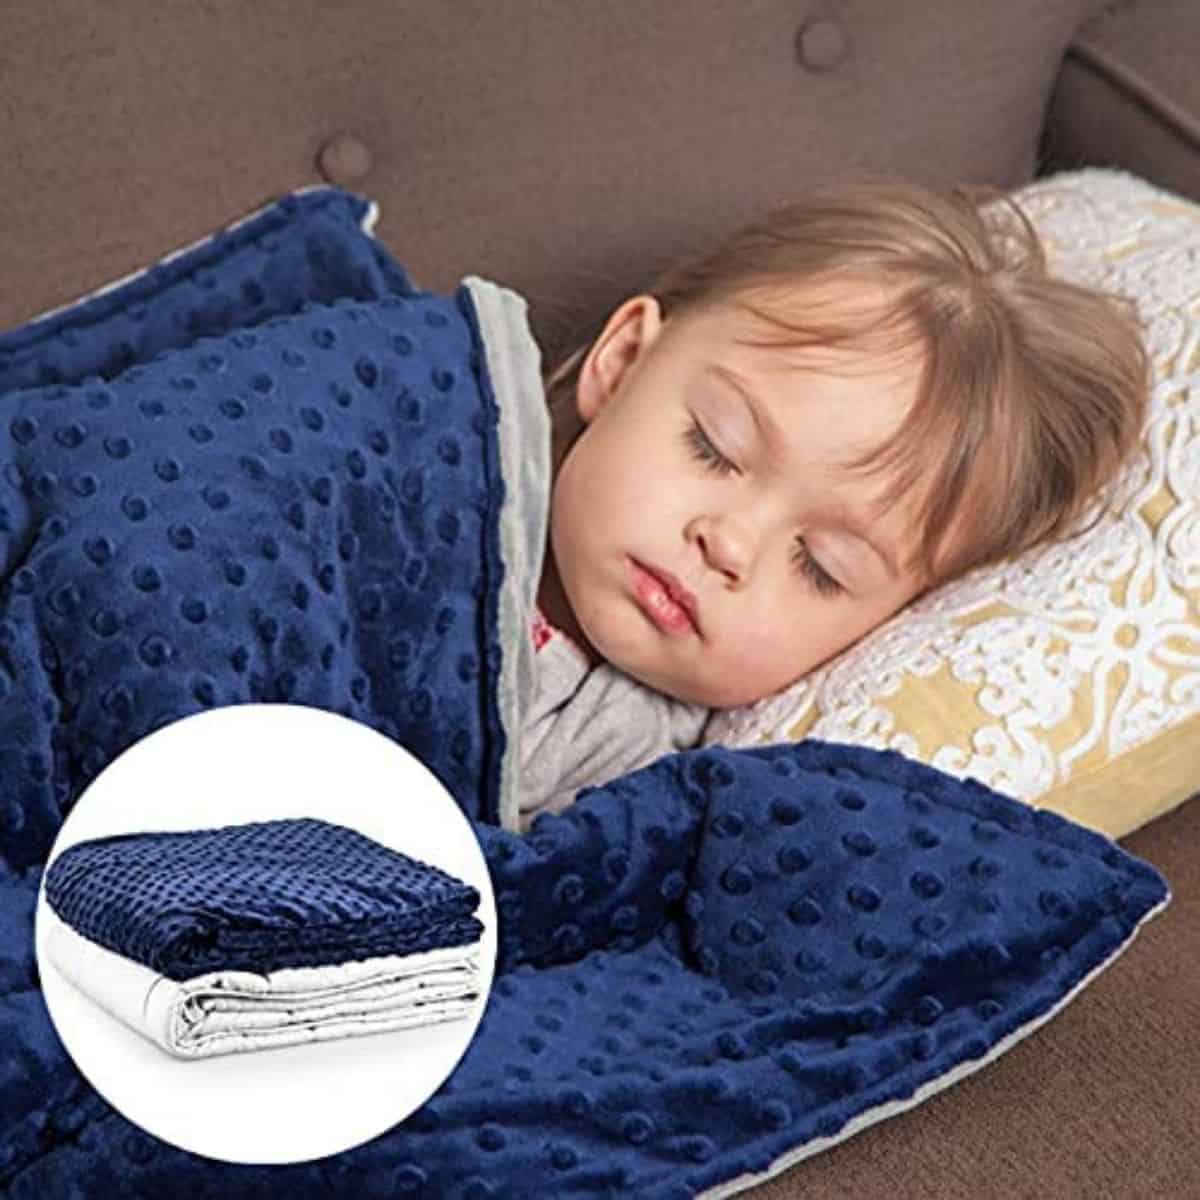 Everything you need to know about weighted blanket for kids, with and without autism from an occupational therapist. Get the best weighted blanket for your kid in 2022 or make a DIY!  